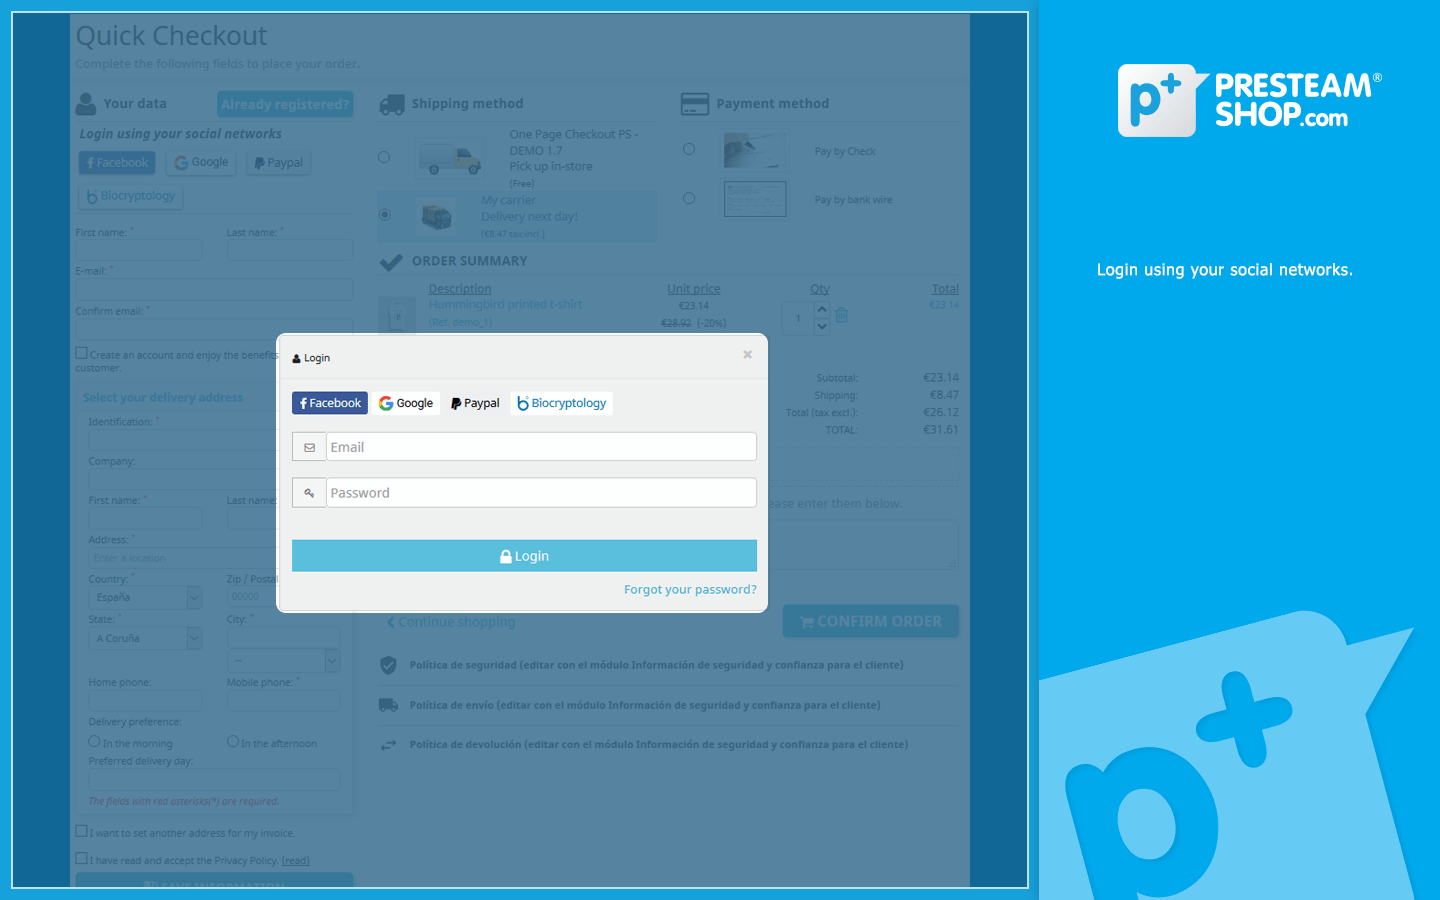 One Page Checkout PS - Improved checkout process